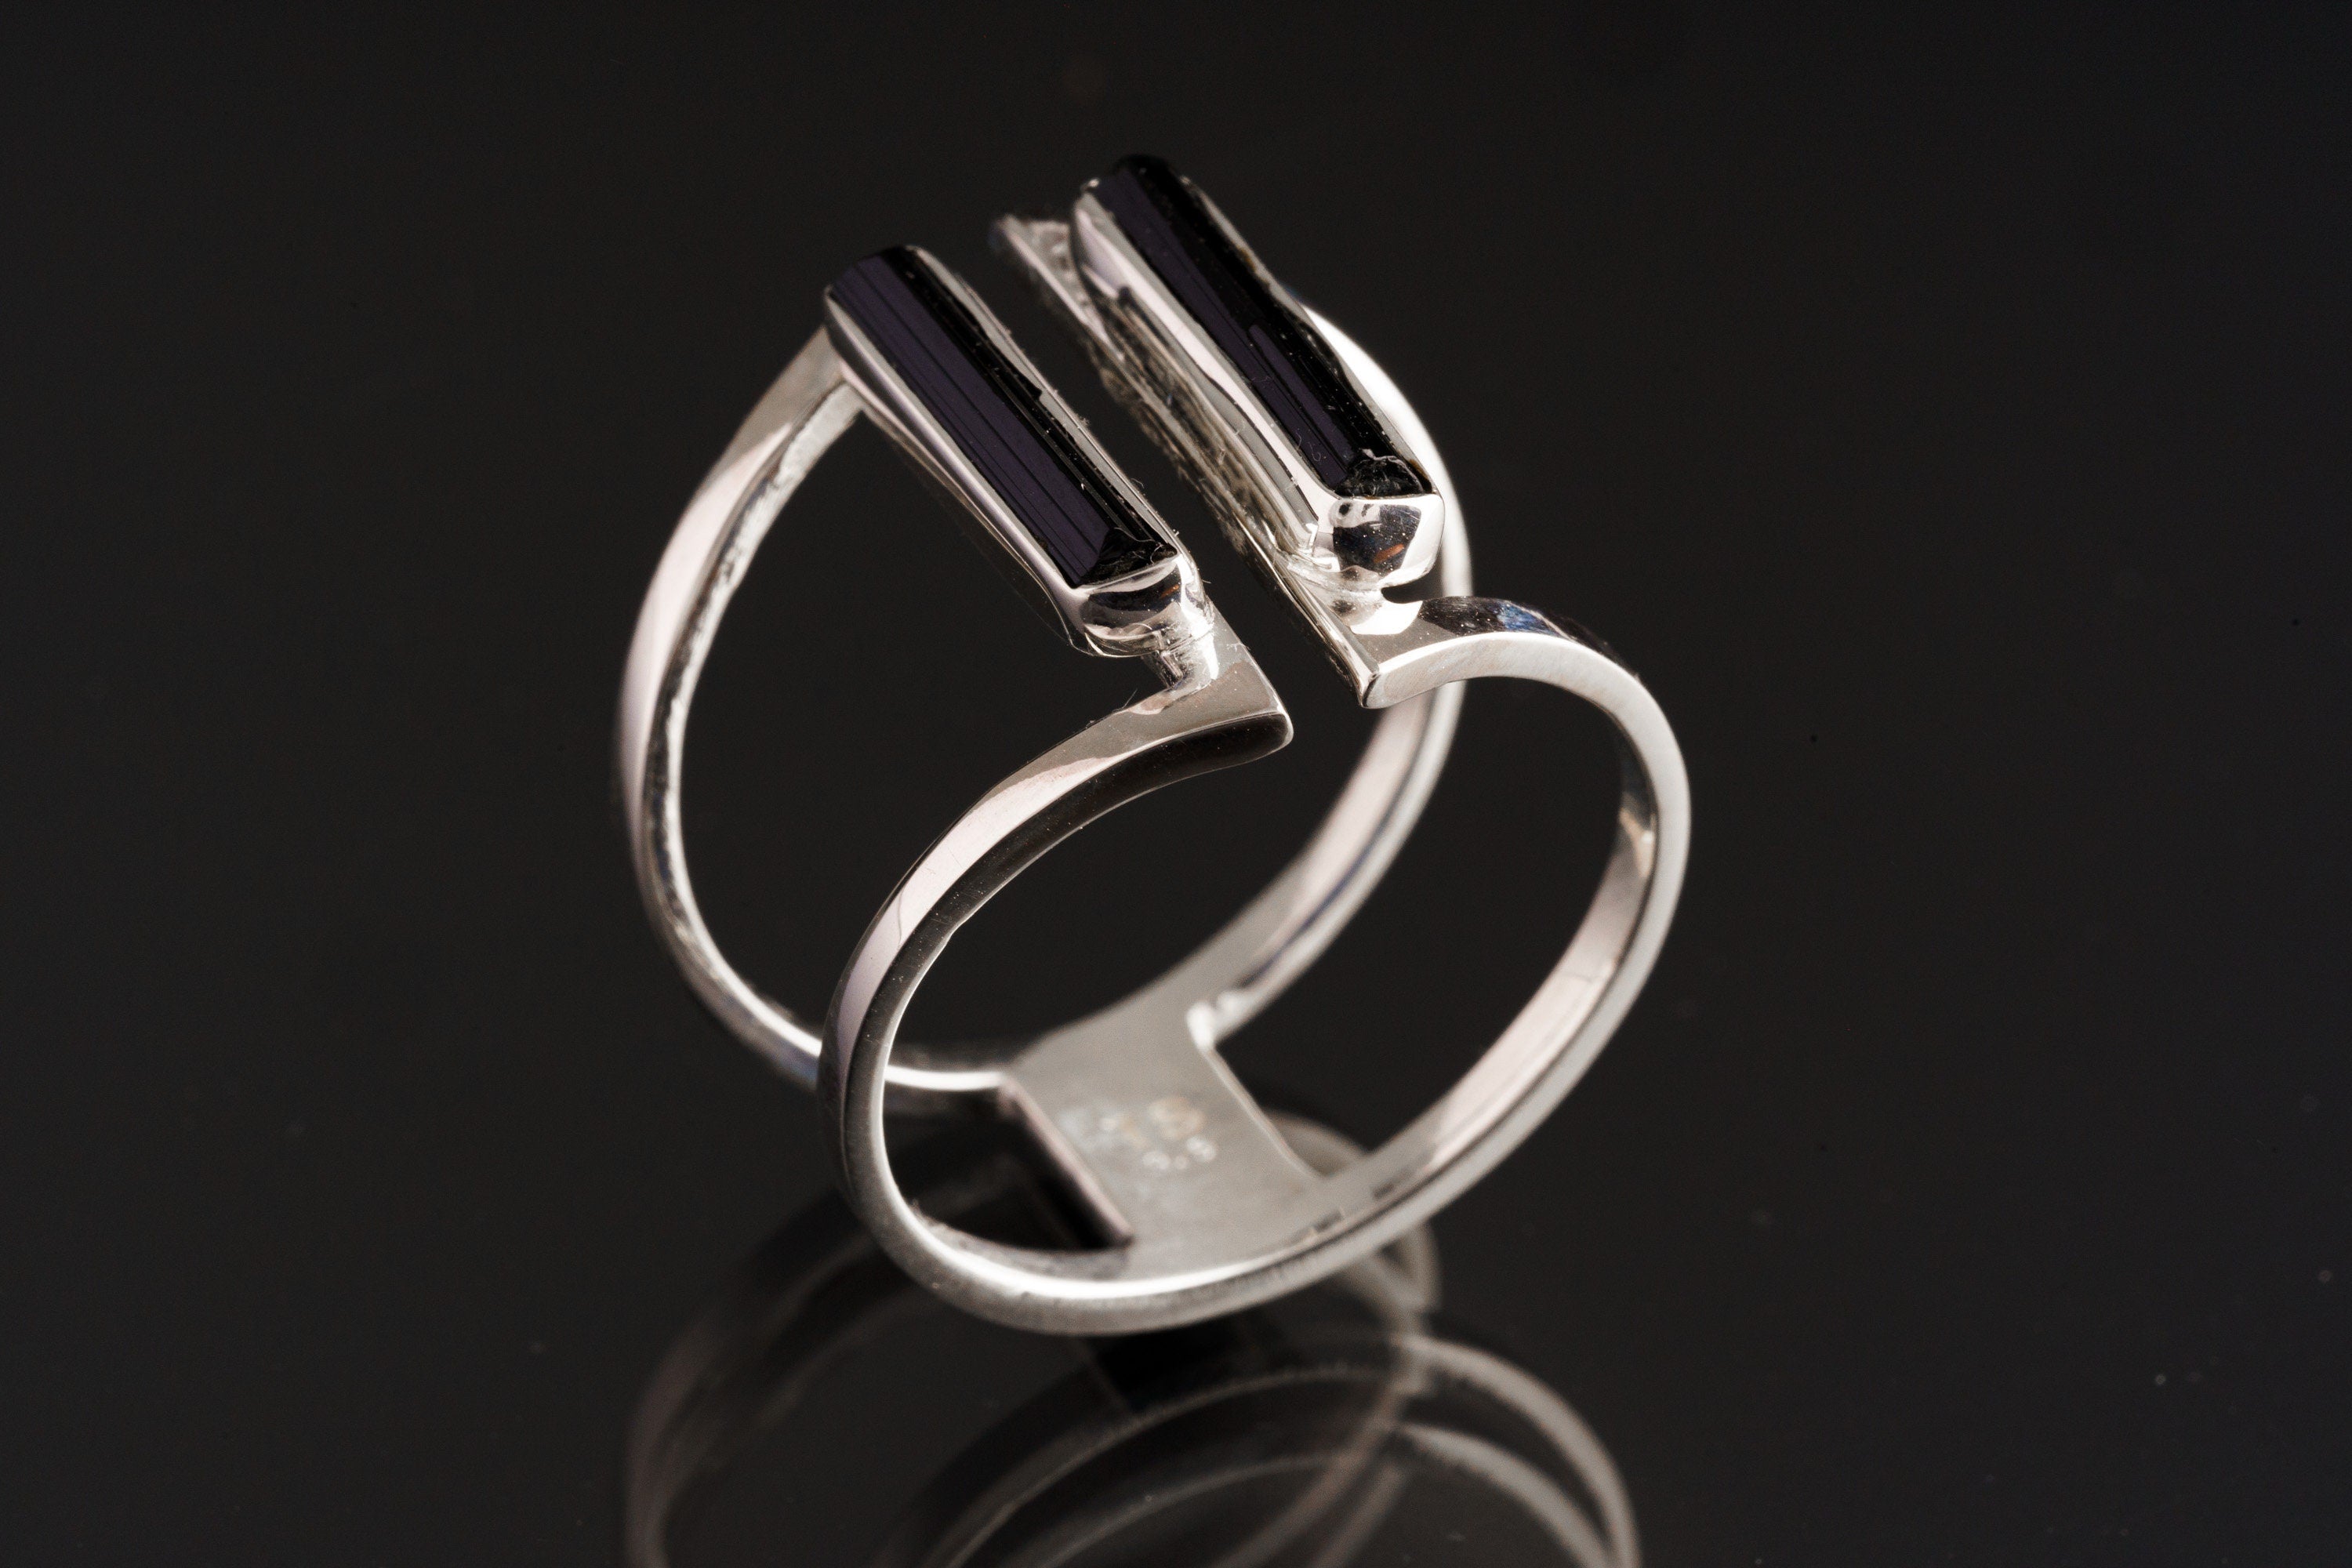 Twin Shadows: Black Tourmaline - Polished finish - Adjustable Sterling Silver Ring - Size 6-10 US